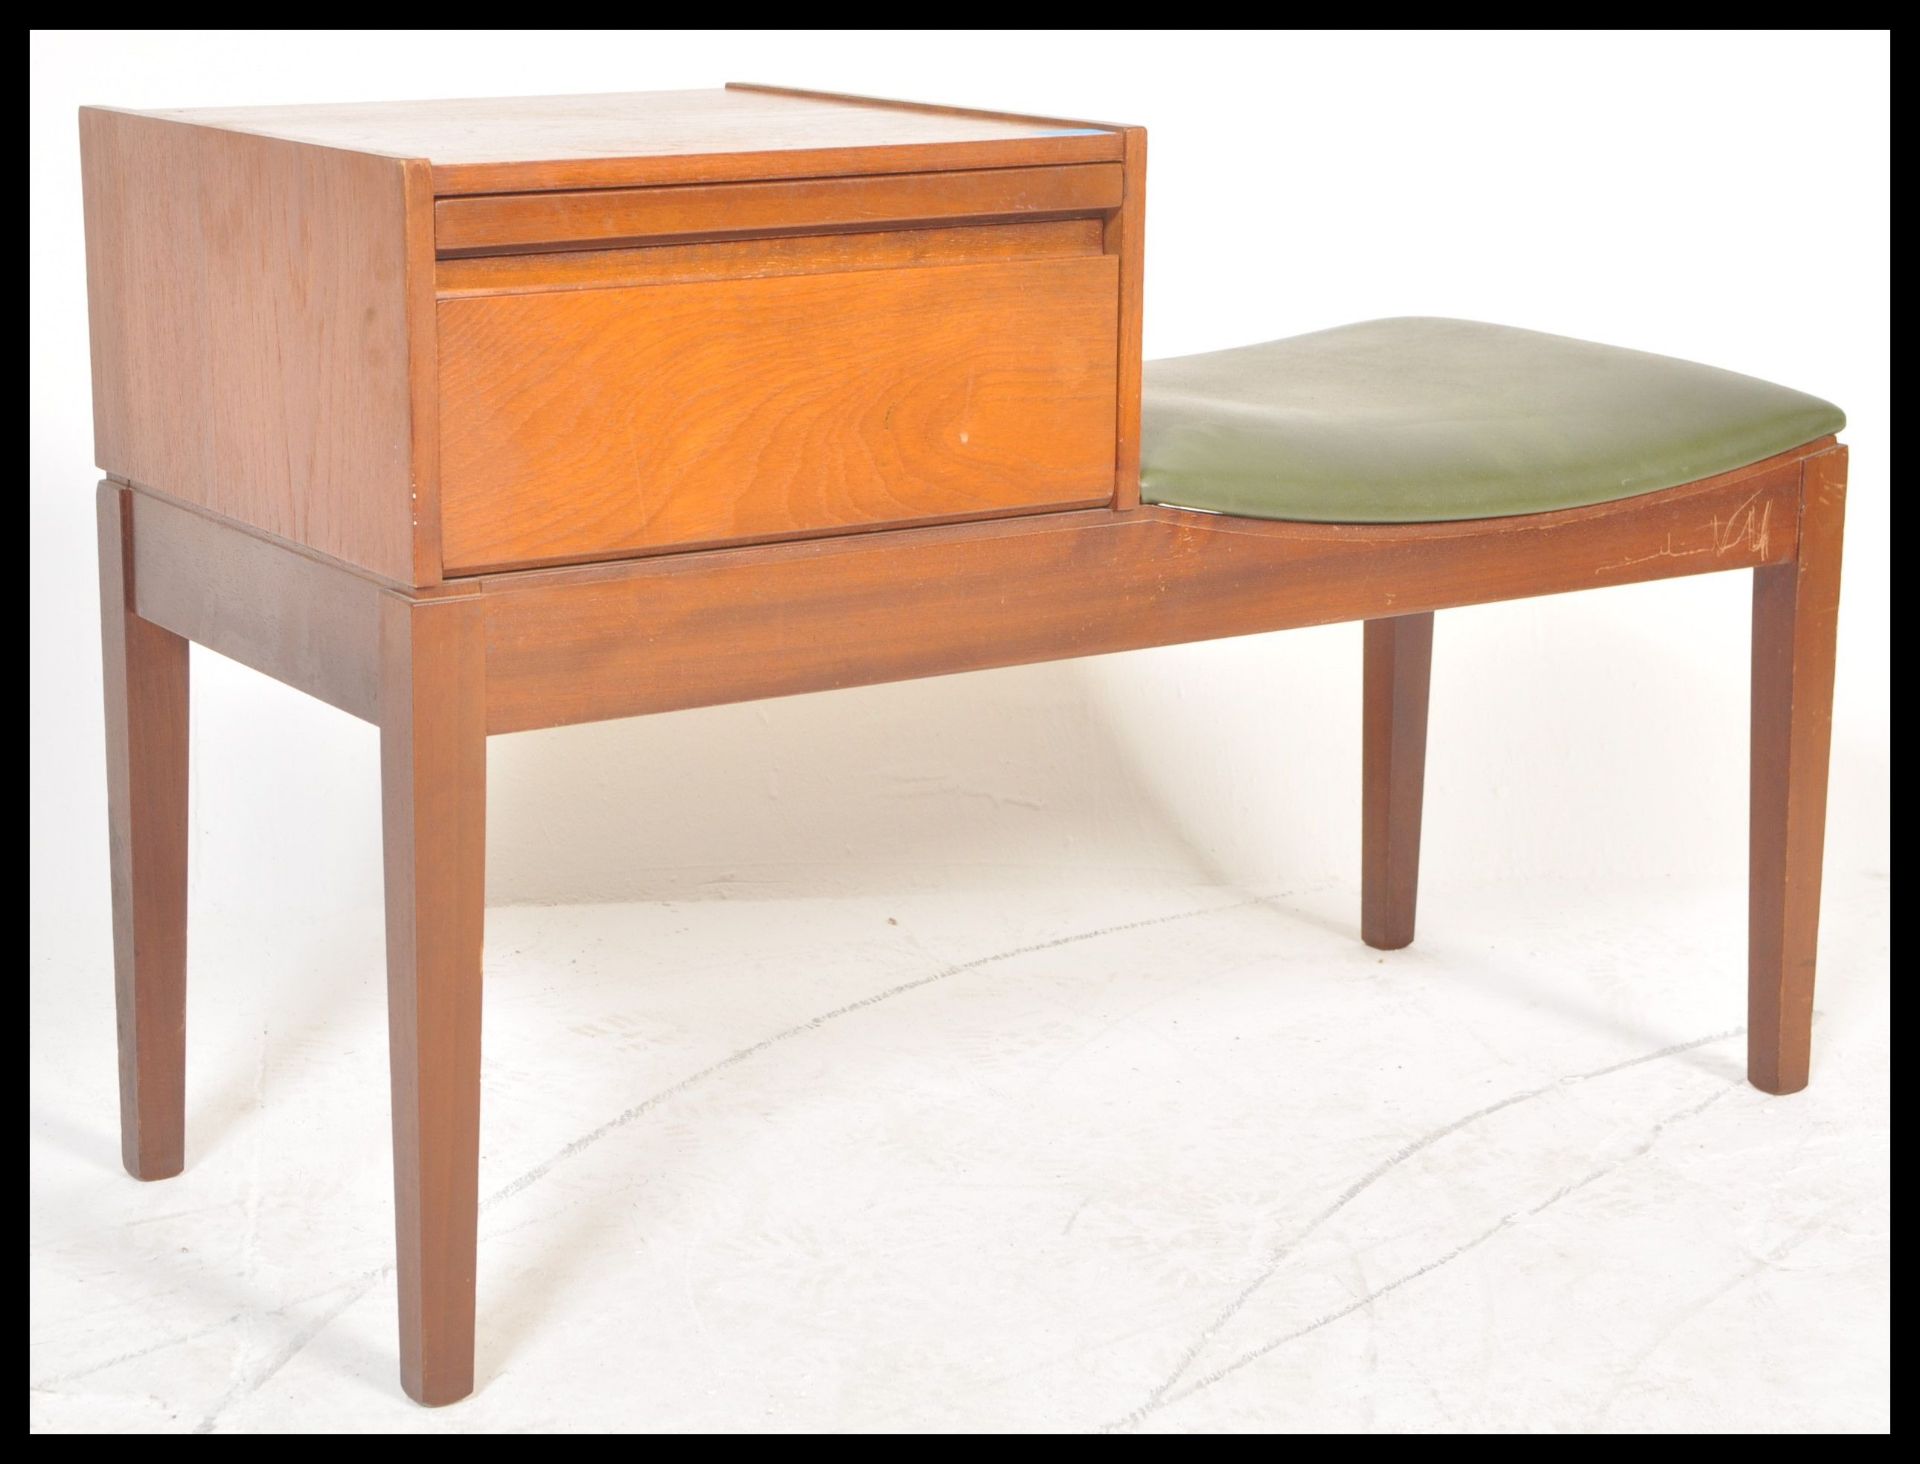 A retro 1970's teak wood telephone table / seat by Mr Chippy, button back seat pad with drawer above